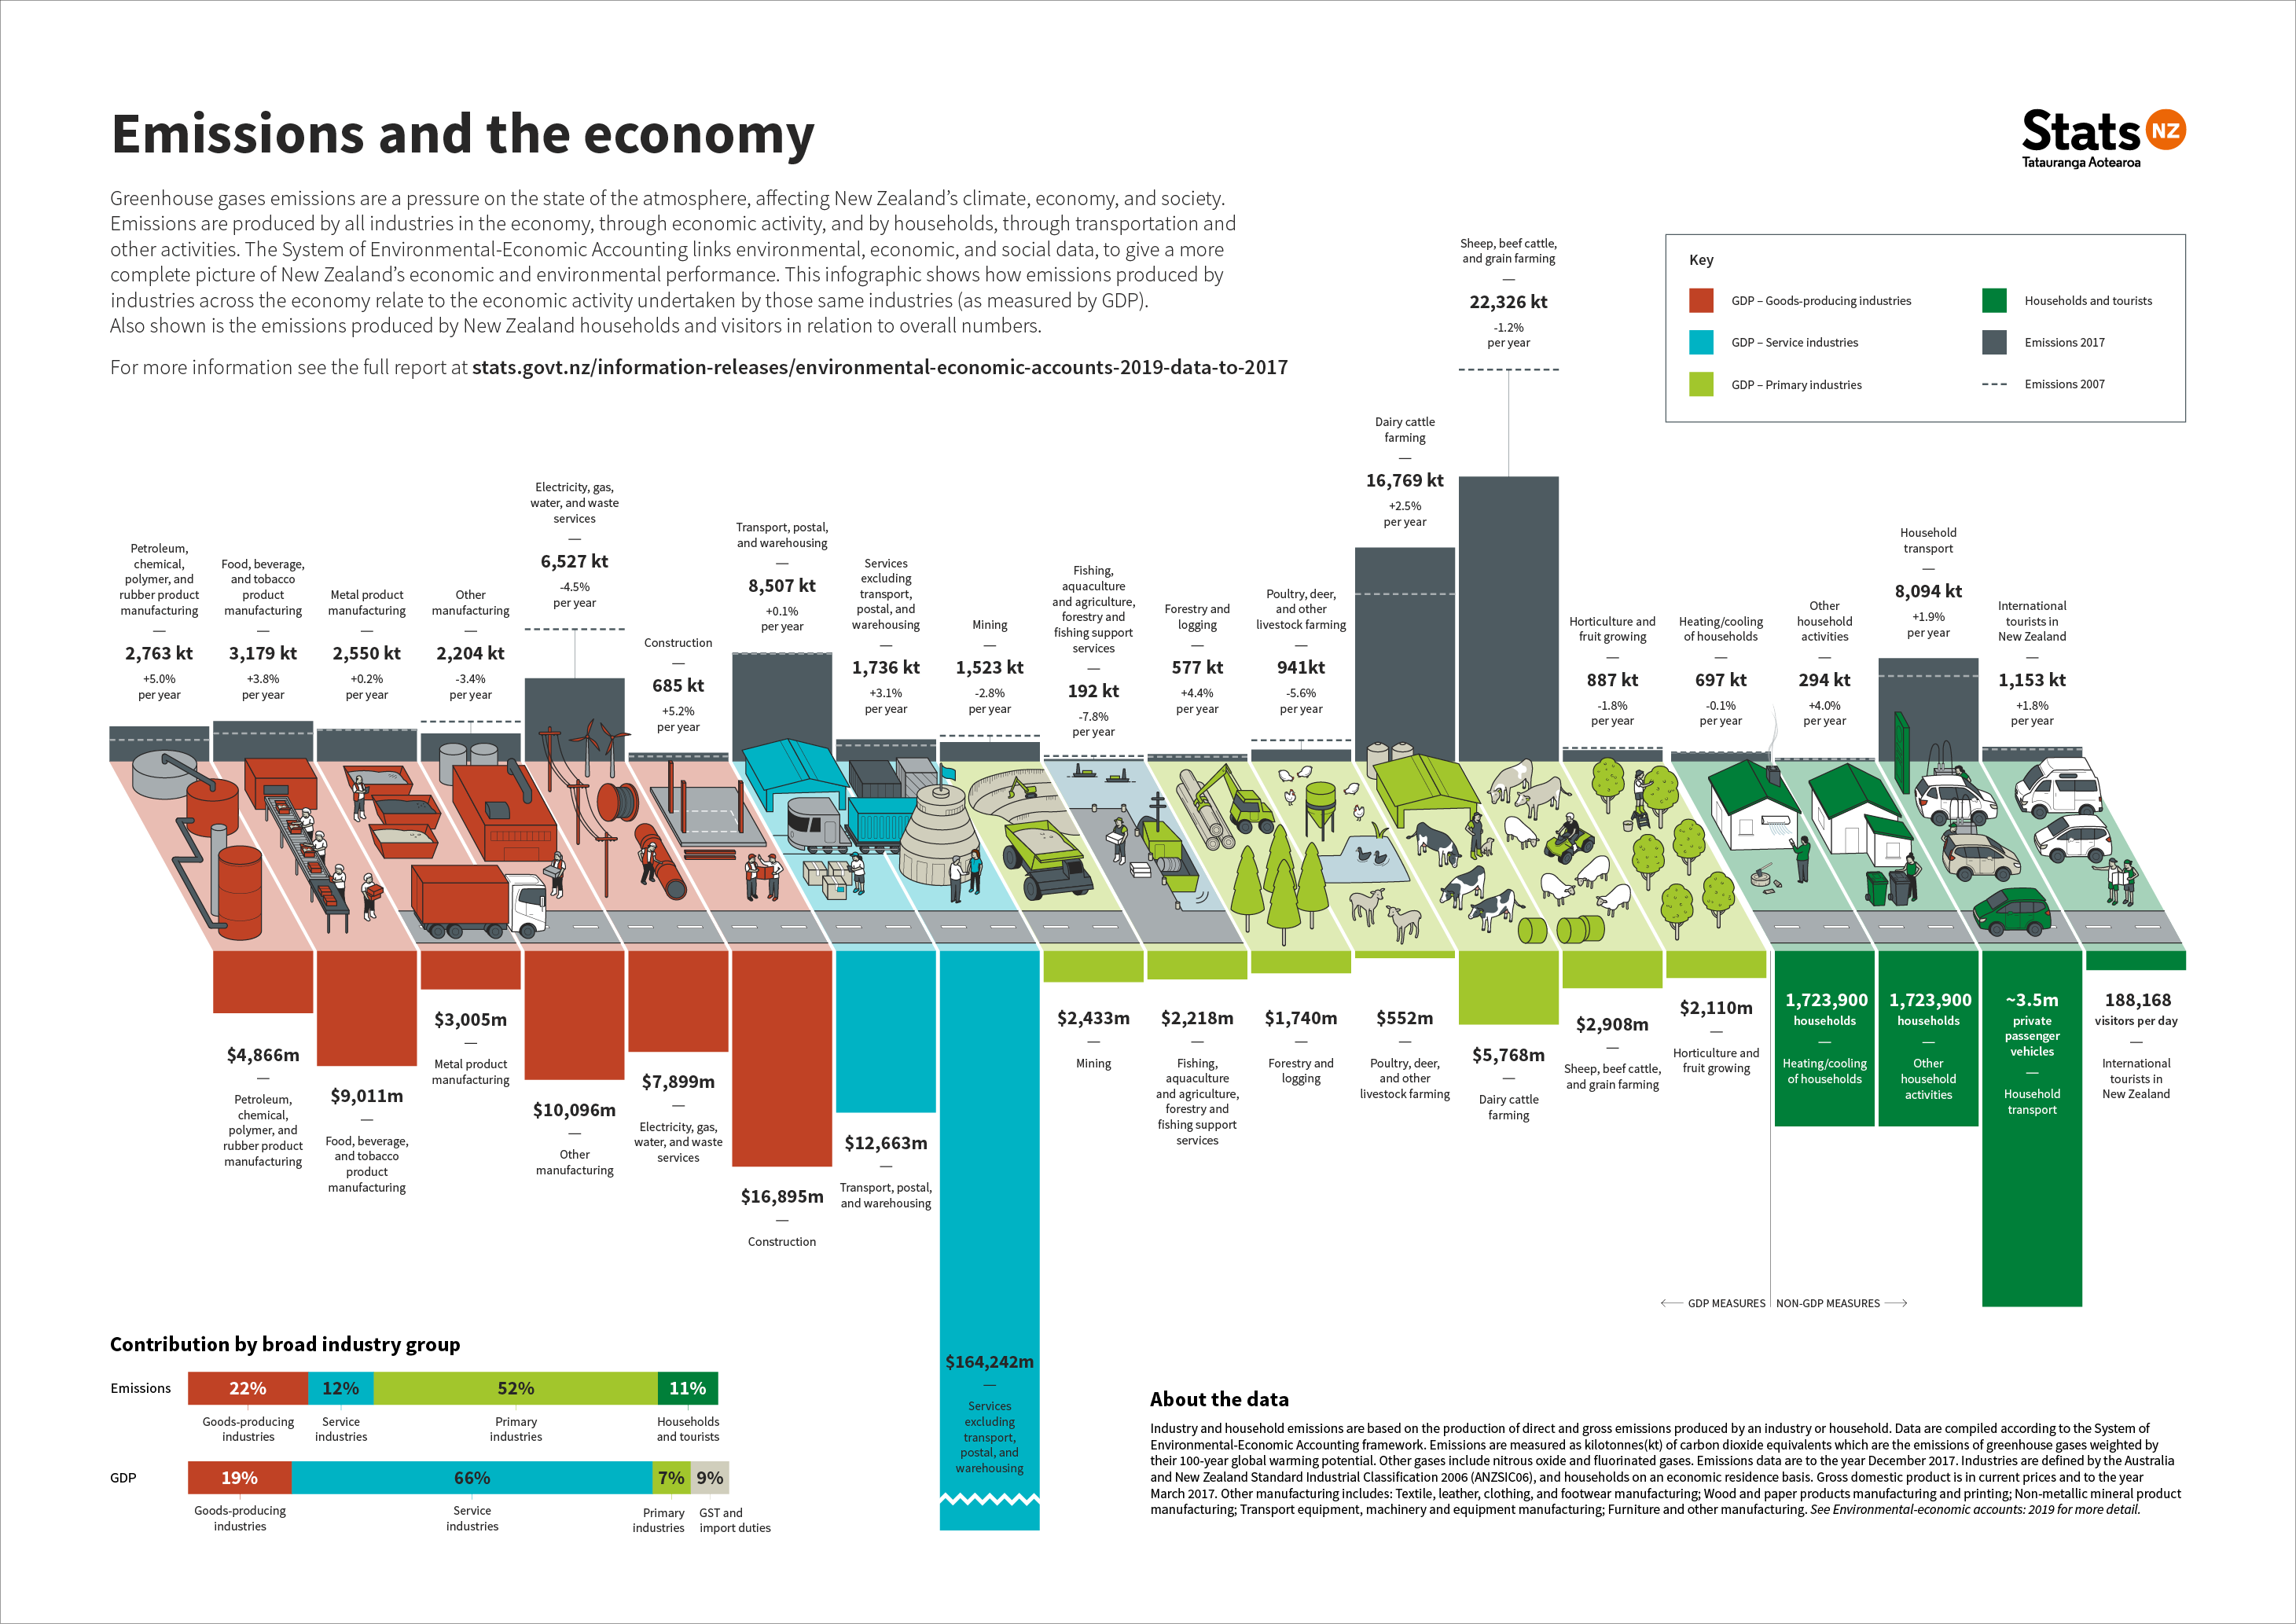 Emissions and the economy infographic